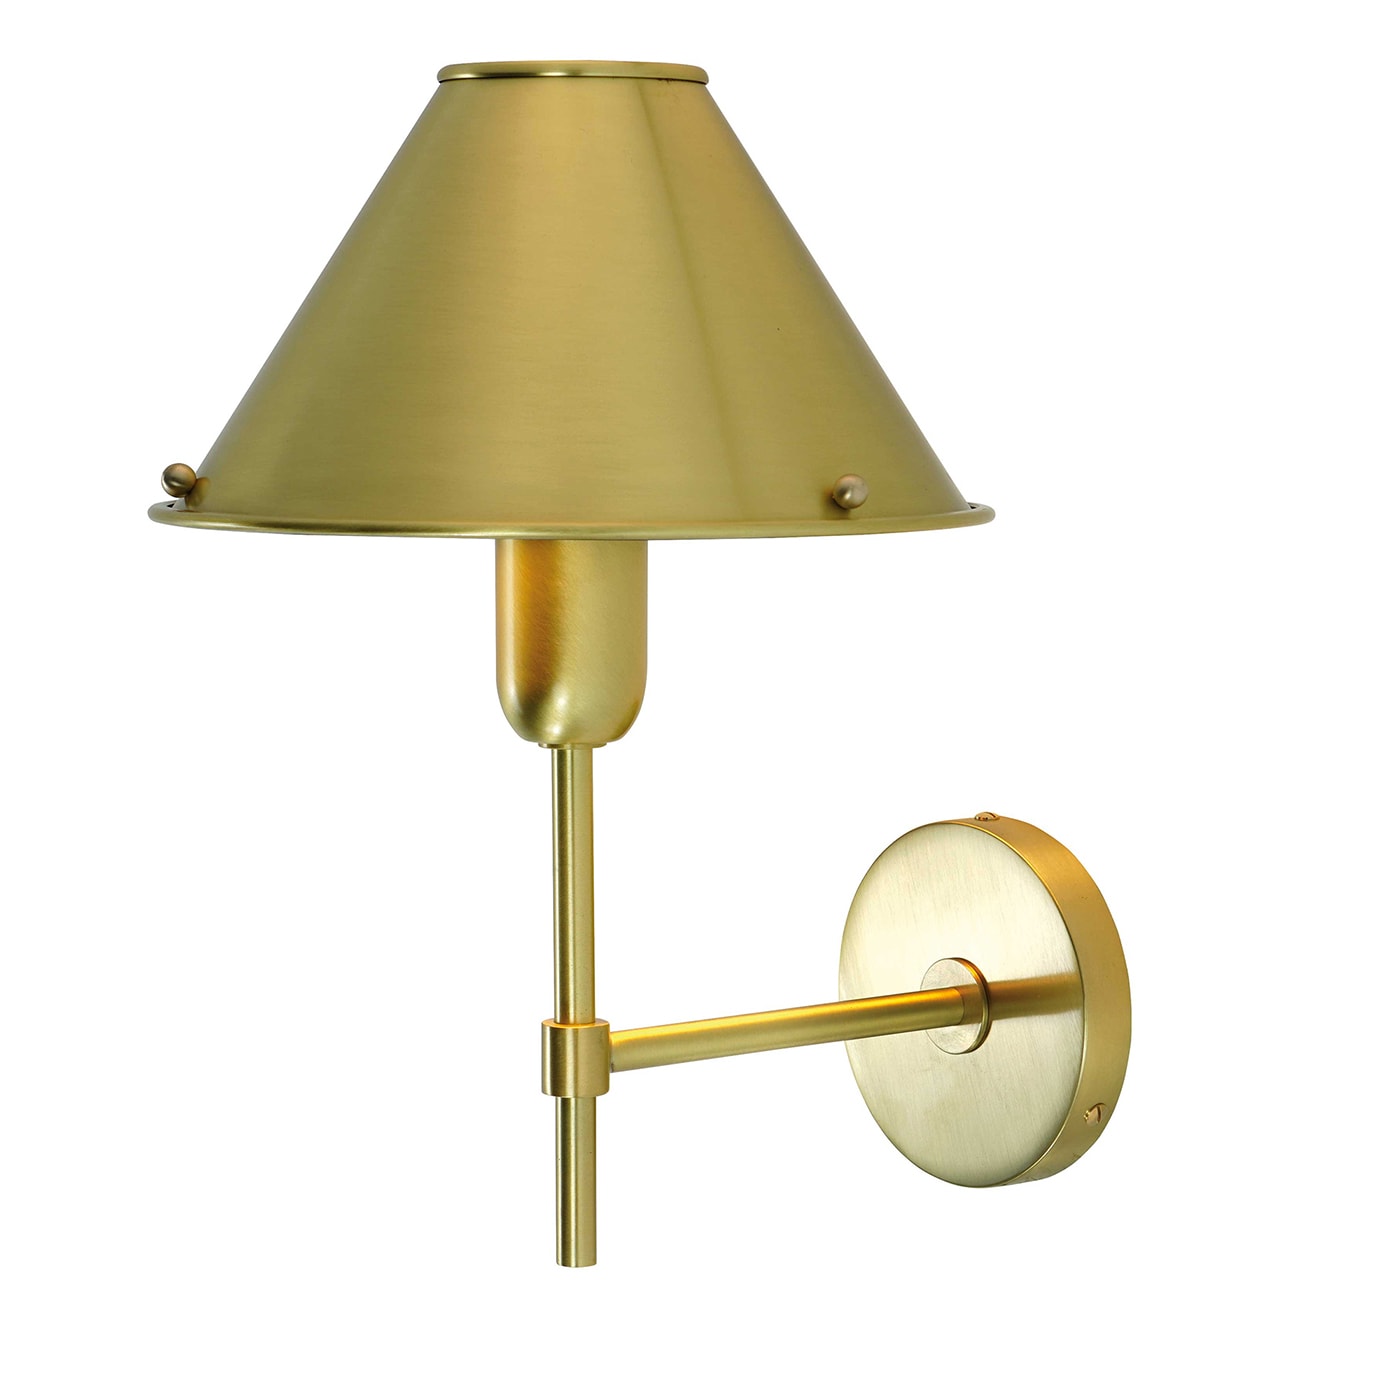 Alicya M340 Brushed Bronze Wall Lamp by Stefano Tabarin - Estro